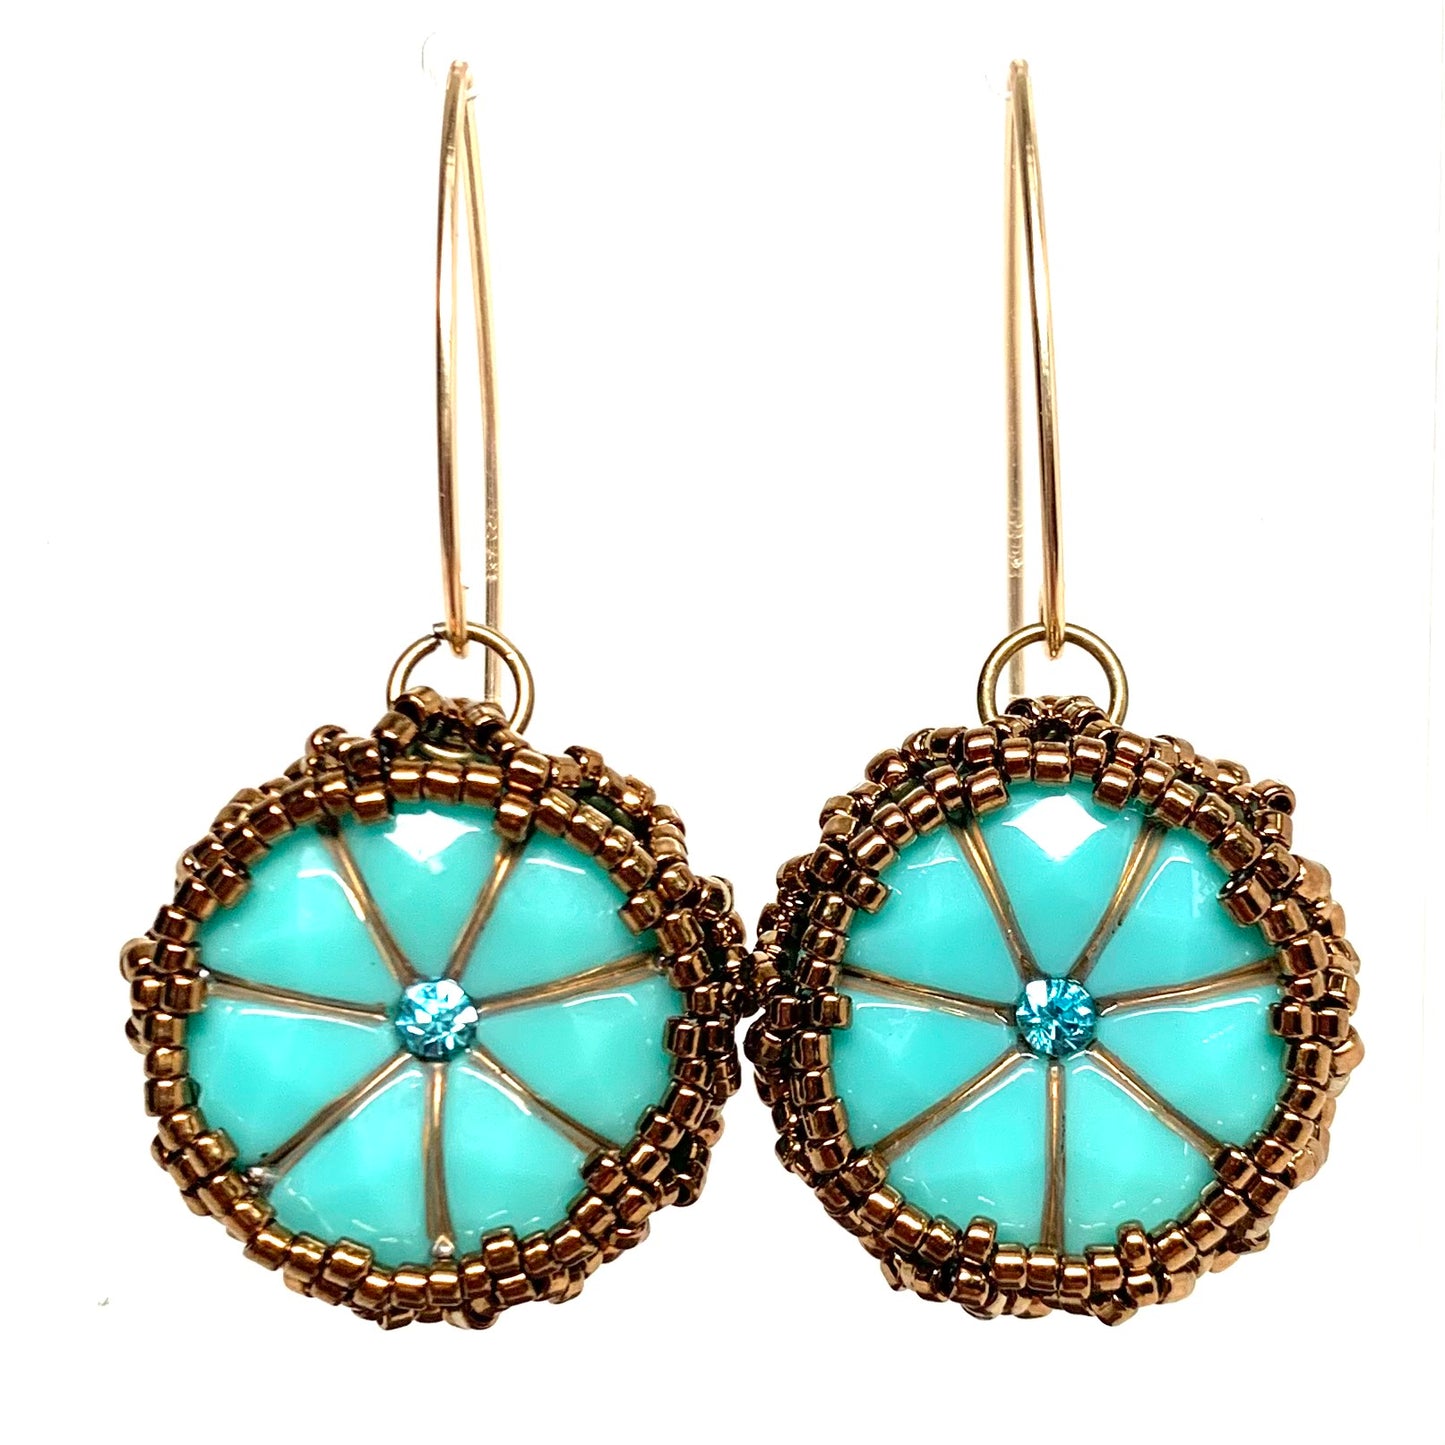 Vintage Style Czech Button Earrings | Turquoise with Rhinestone